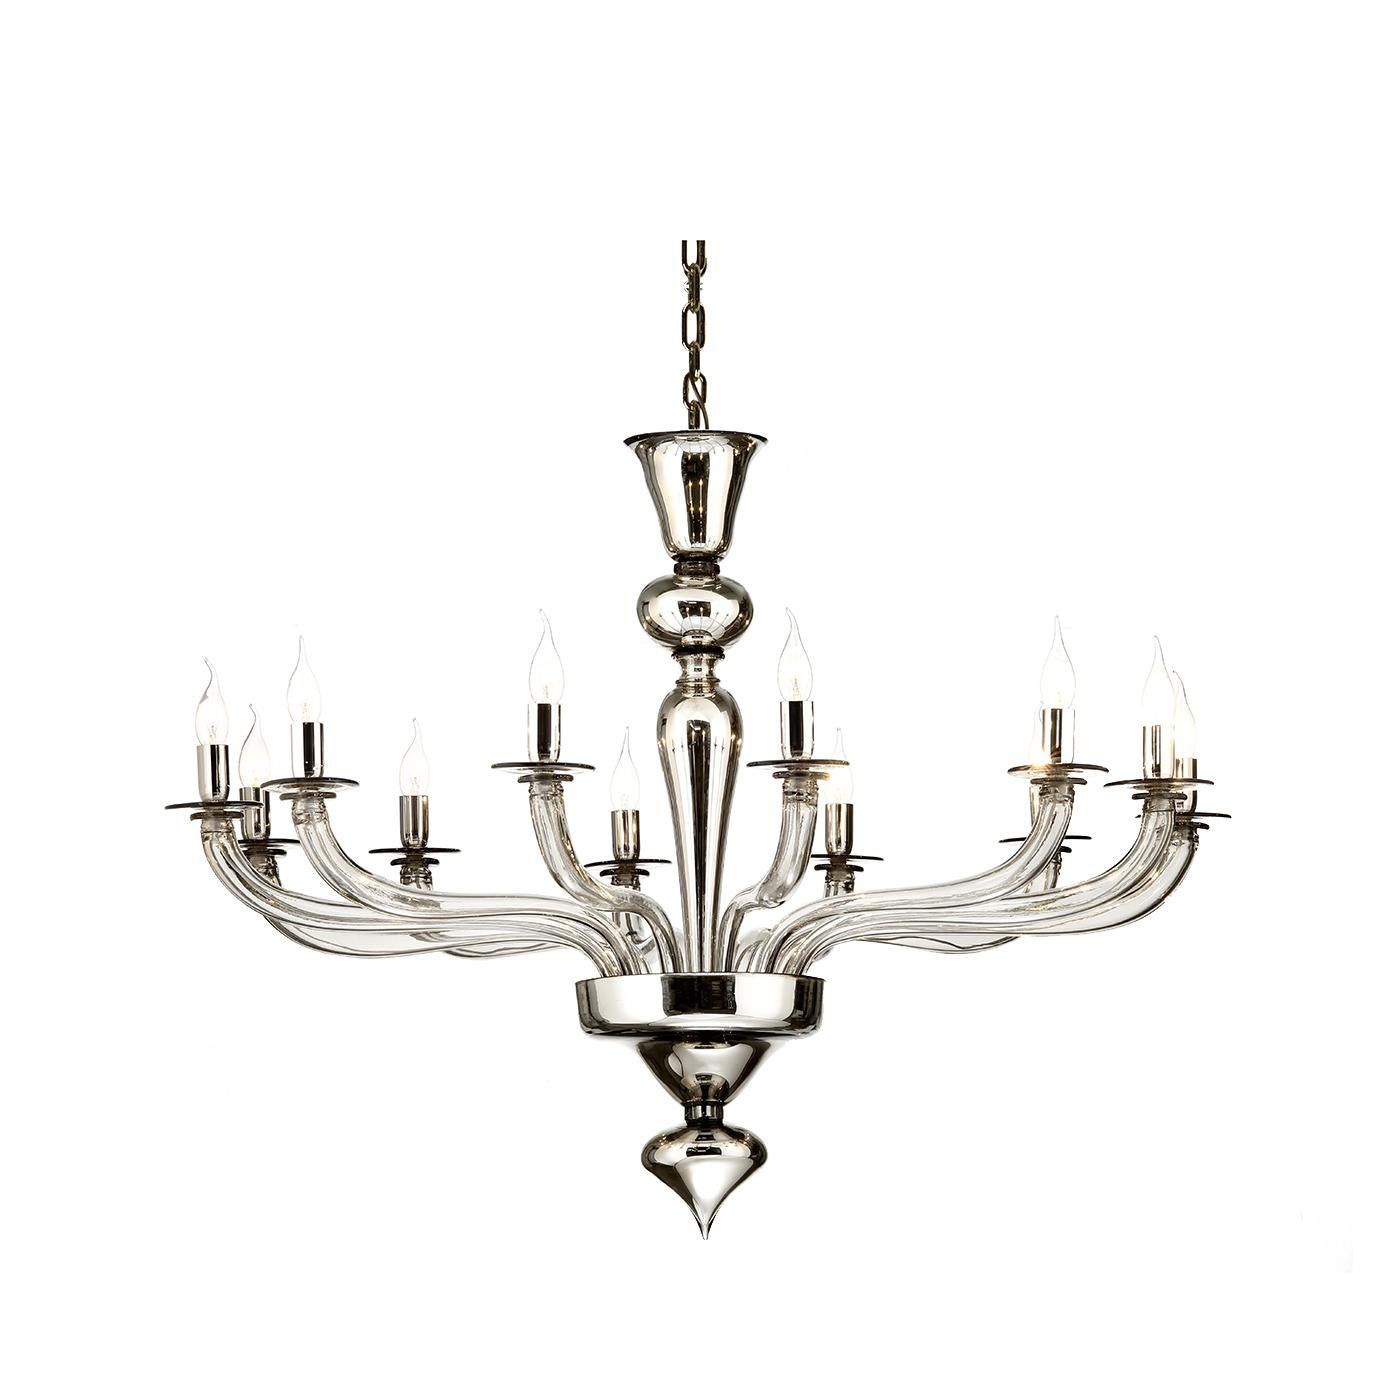 Modern design and traditional silhouette blend in this Venetian glass chandelier that will bring timeless, sophisticated allure to any interior. This exquisite piece of functional decor is a play on two tones of steel color, a mirrored finish